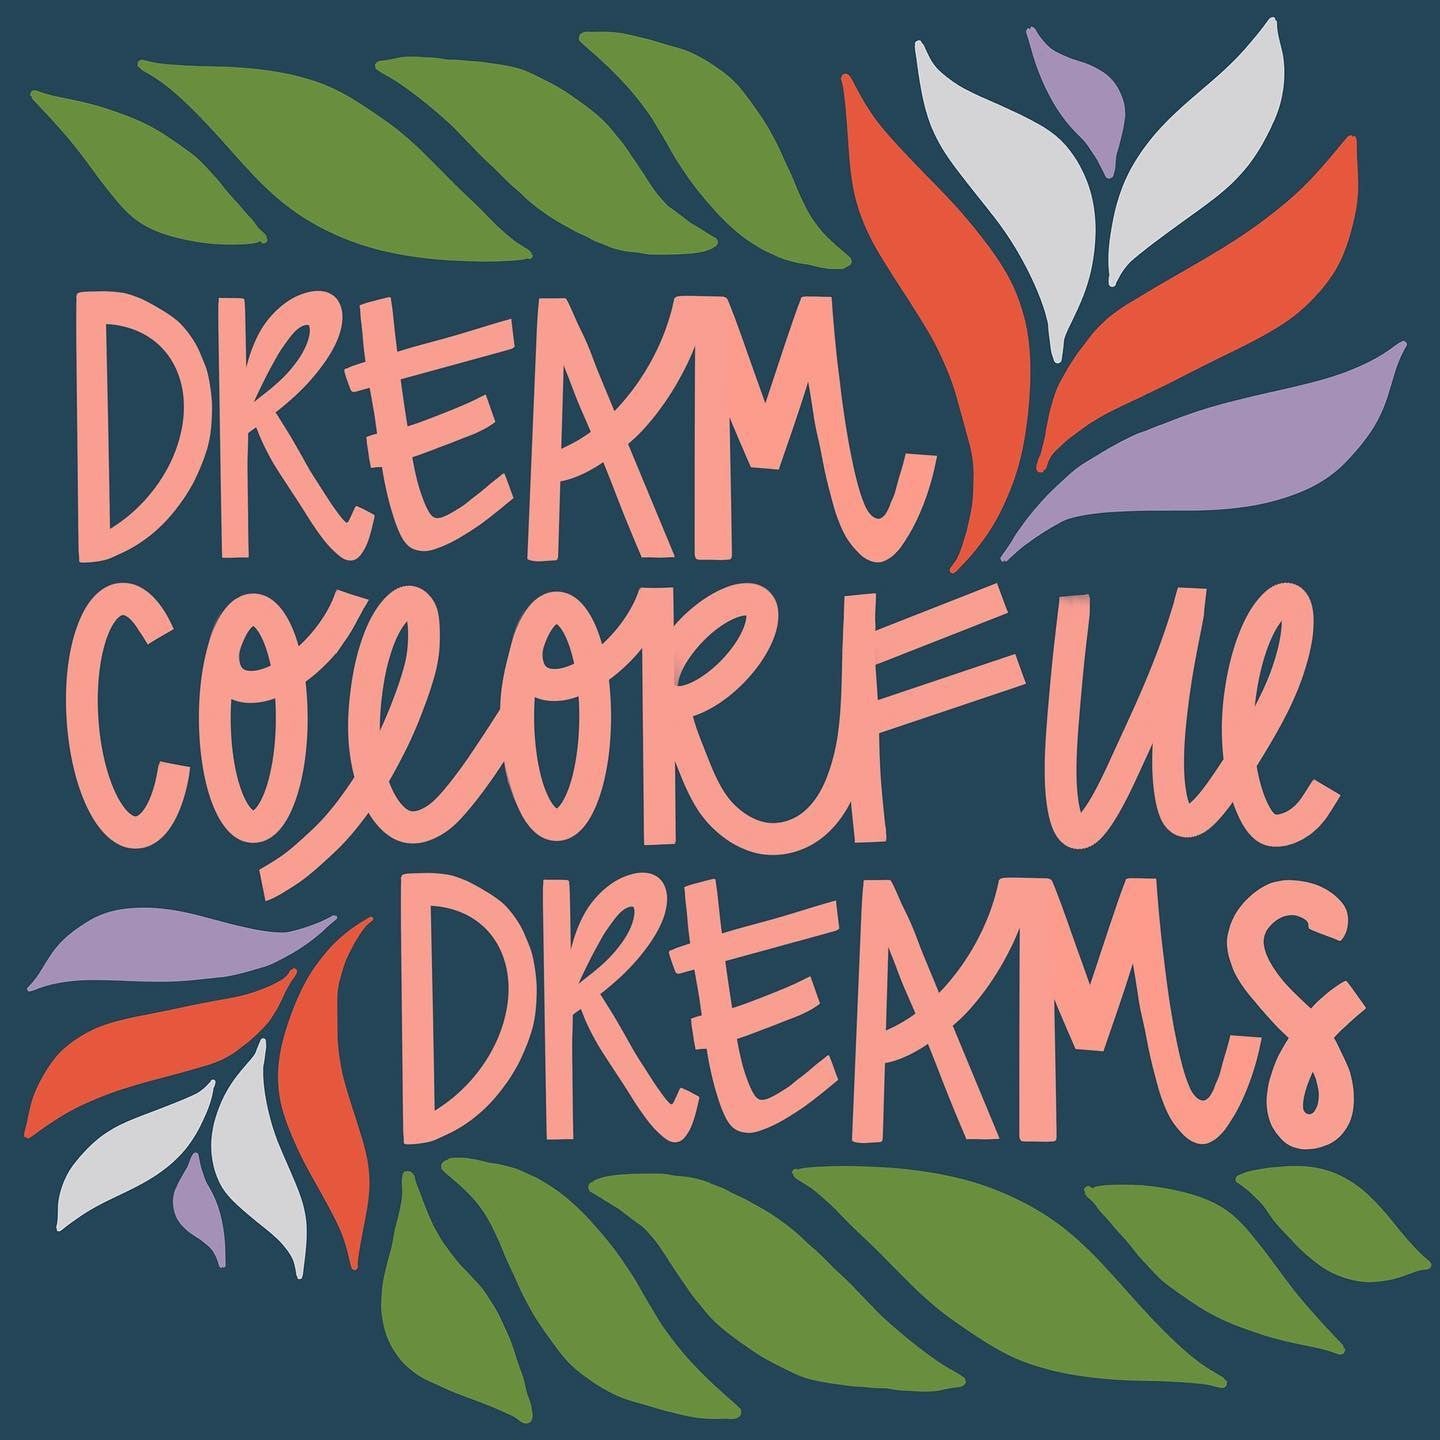 Dream Colorful Dreams Paint By Numbers By Rebecca Jane Woolbright